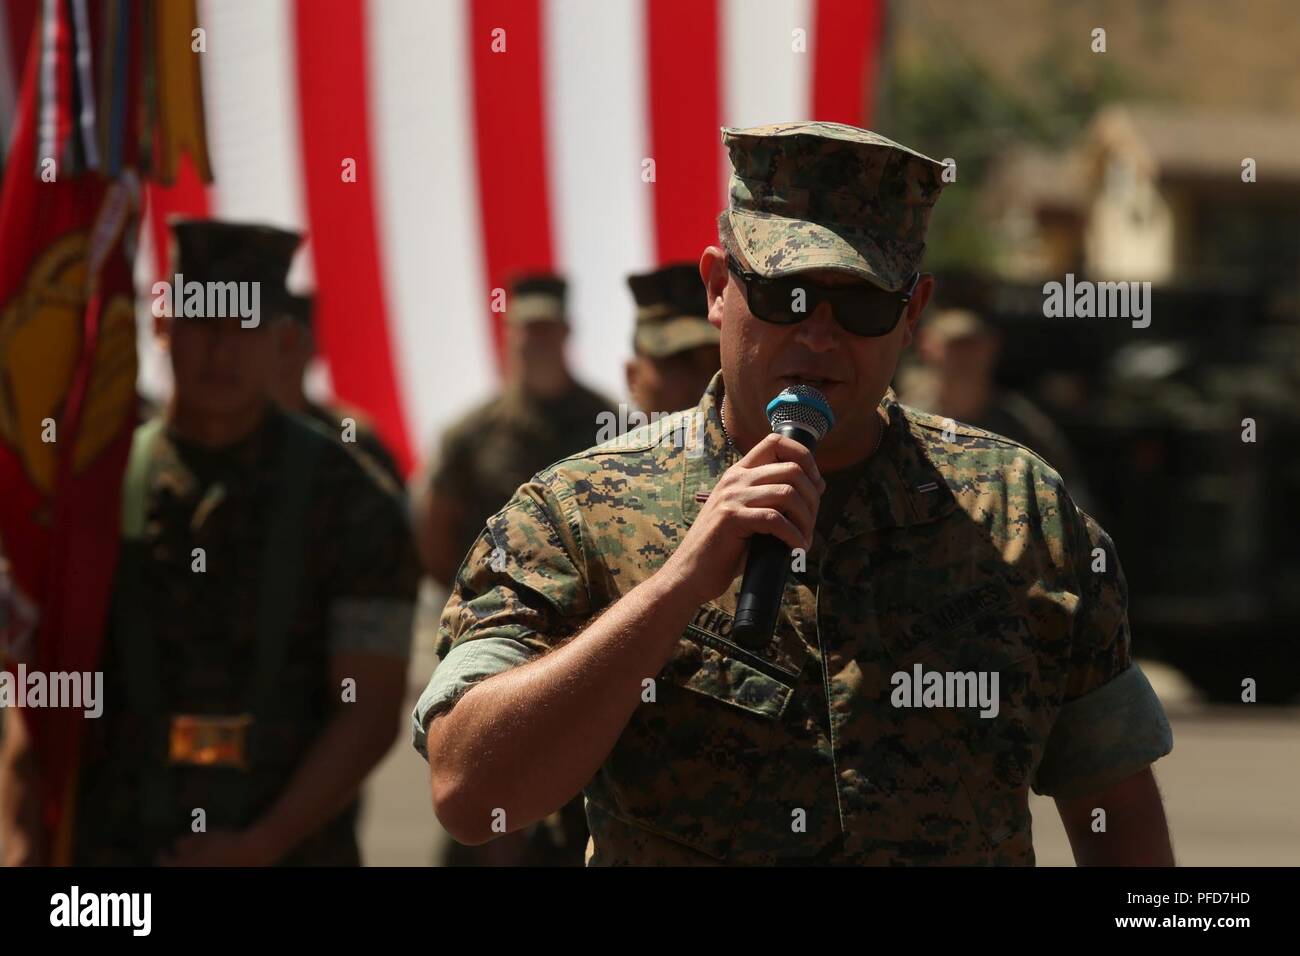 U.S. Marine Corps Chief Warrant Officer 5 David C. Thomas, with Fire and Maneuver Intergration Division, Headquarters Marine Corps, delievers a speech during a retirement ceremony at Marine Corps Base Camp Pendleton, Calif., June 7, 2018. The ceremony was held in honor of Thomas for his 30 years of meritorious service. Stock Photo